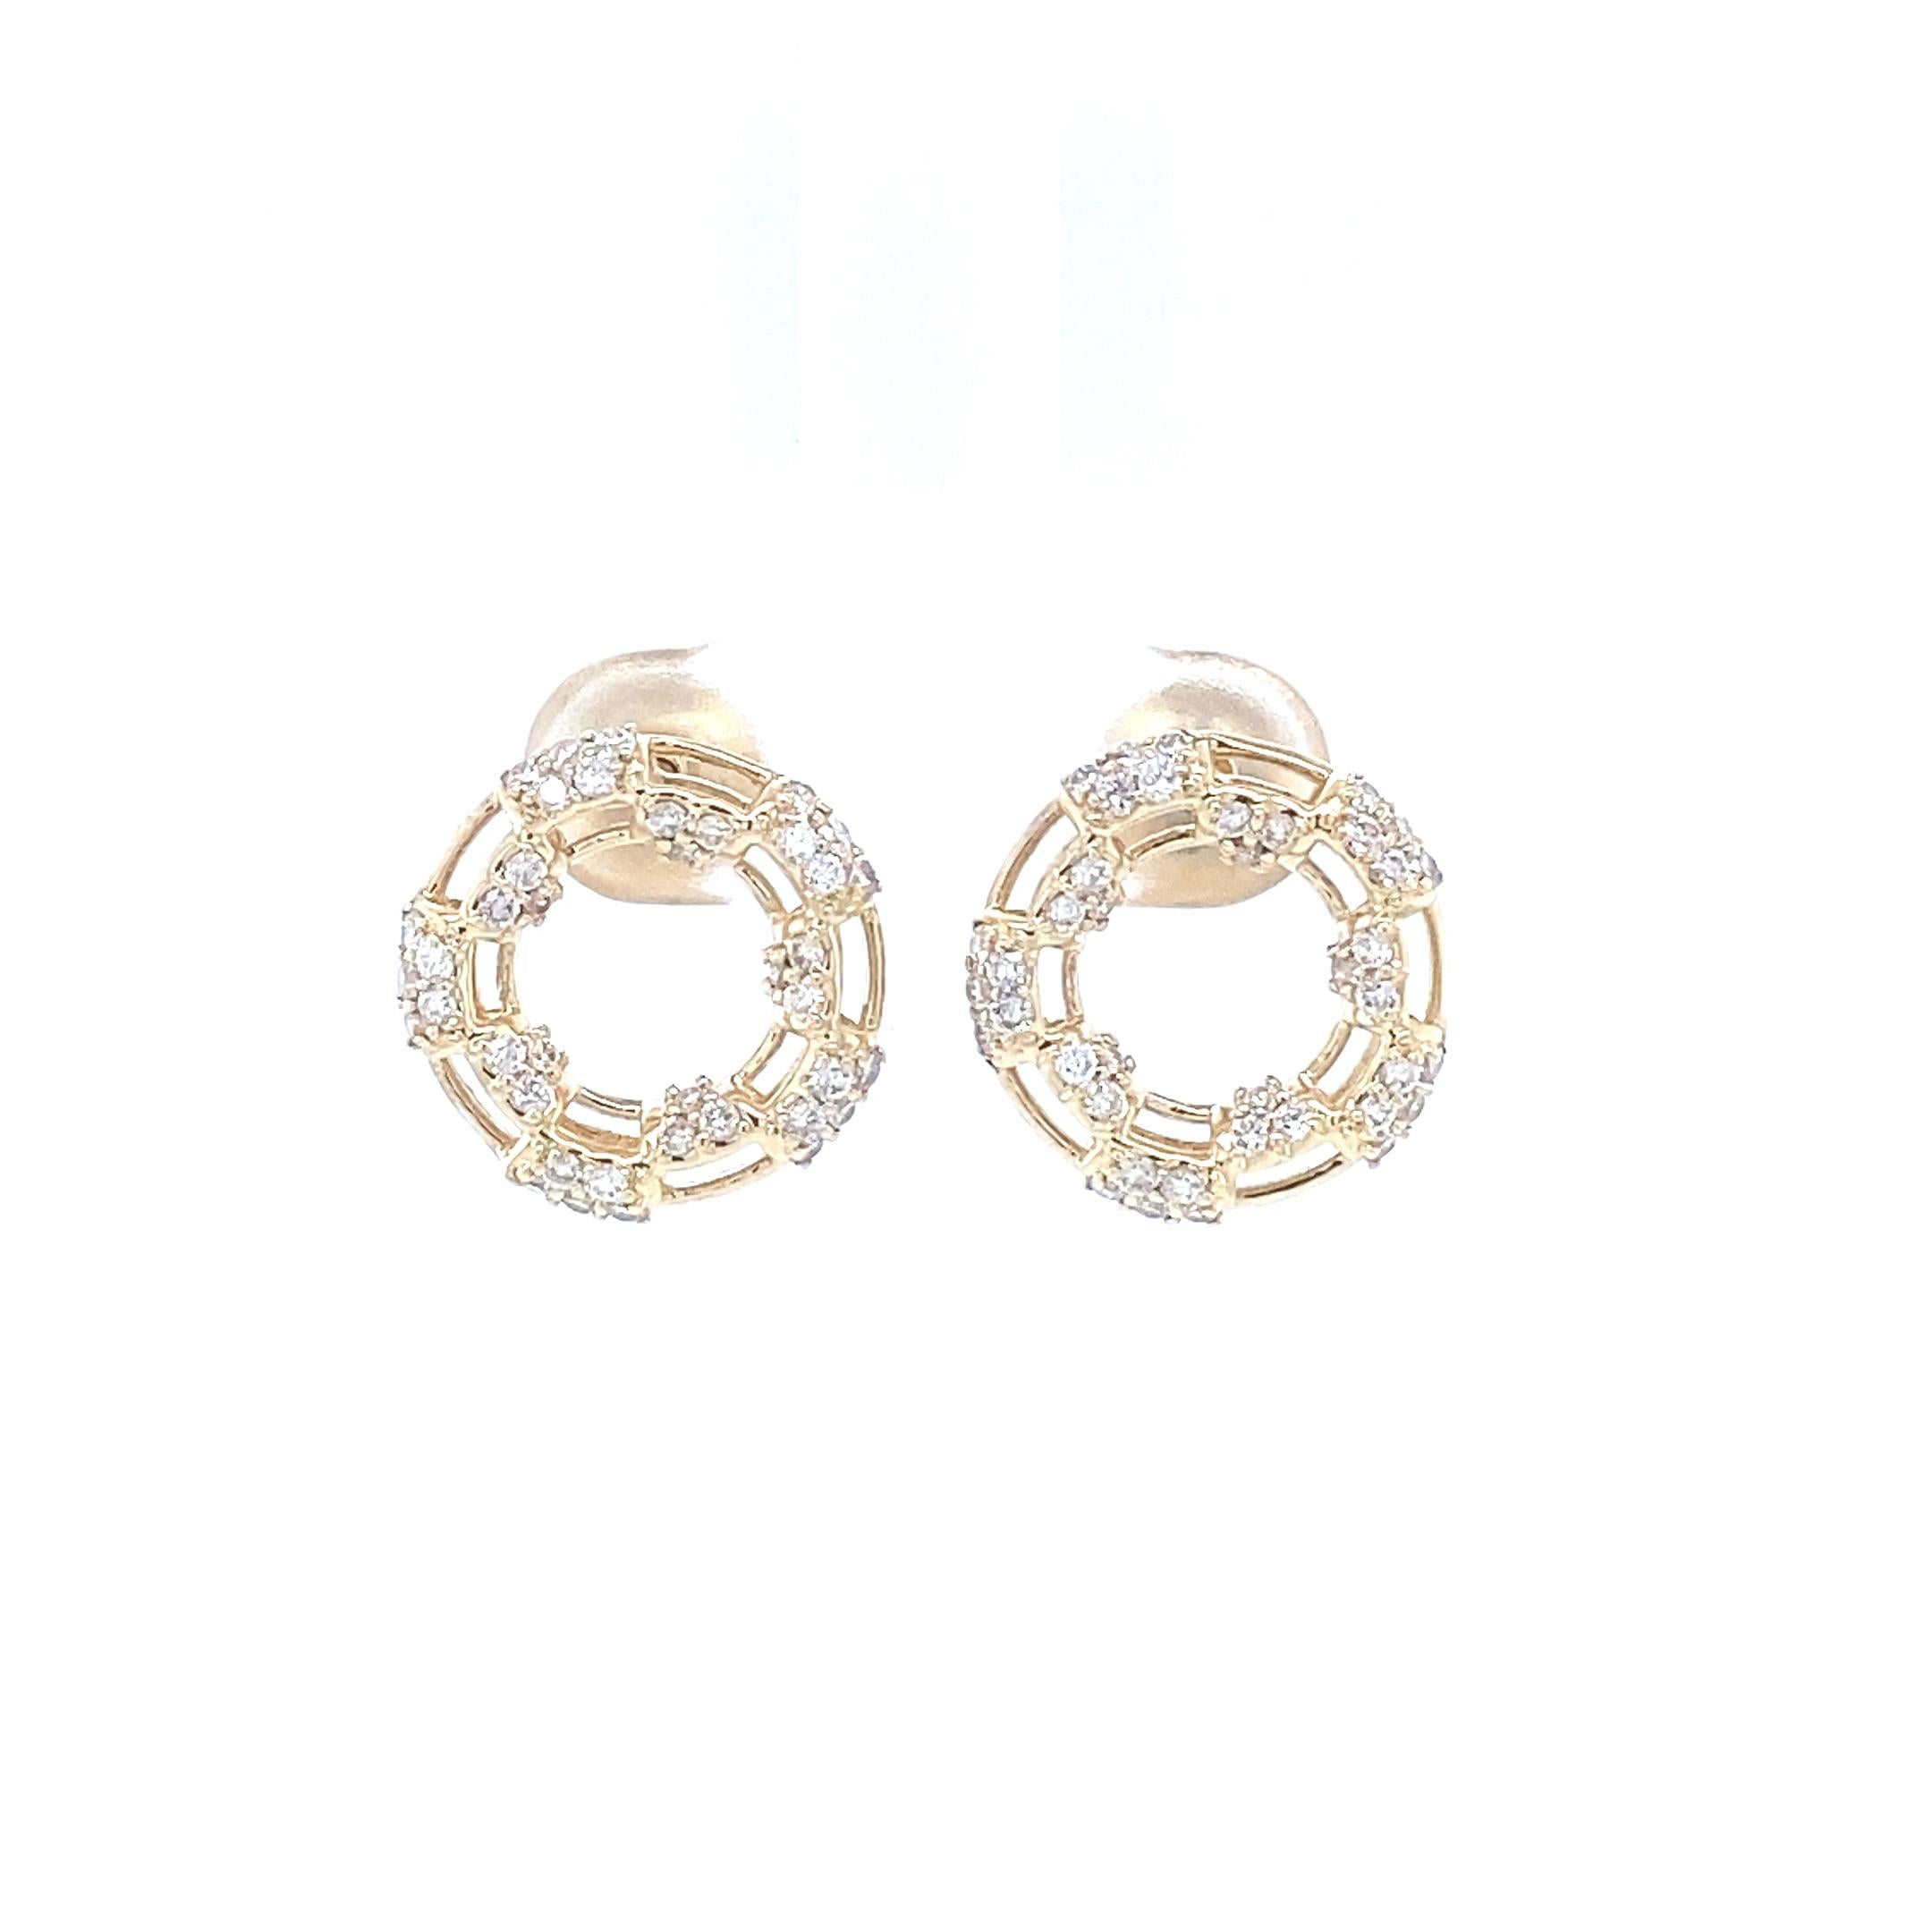 The earrings depicted are elegant, featuring a sophisticated geometric design composed of multiple interlocking circles. They are adorned with numerous small, round-cut diamonds meticulously set along the structure, giving off a dazzling sparkle